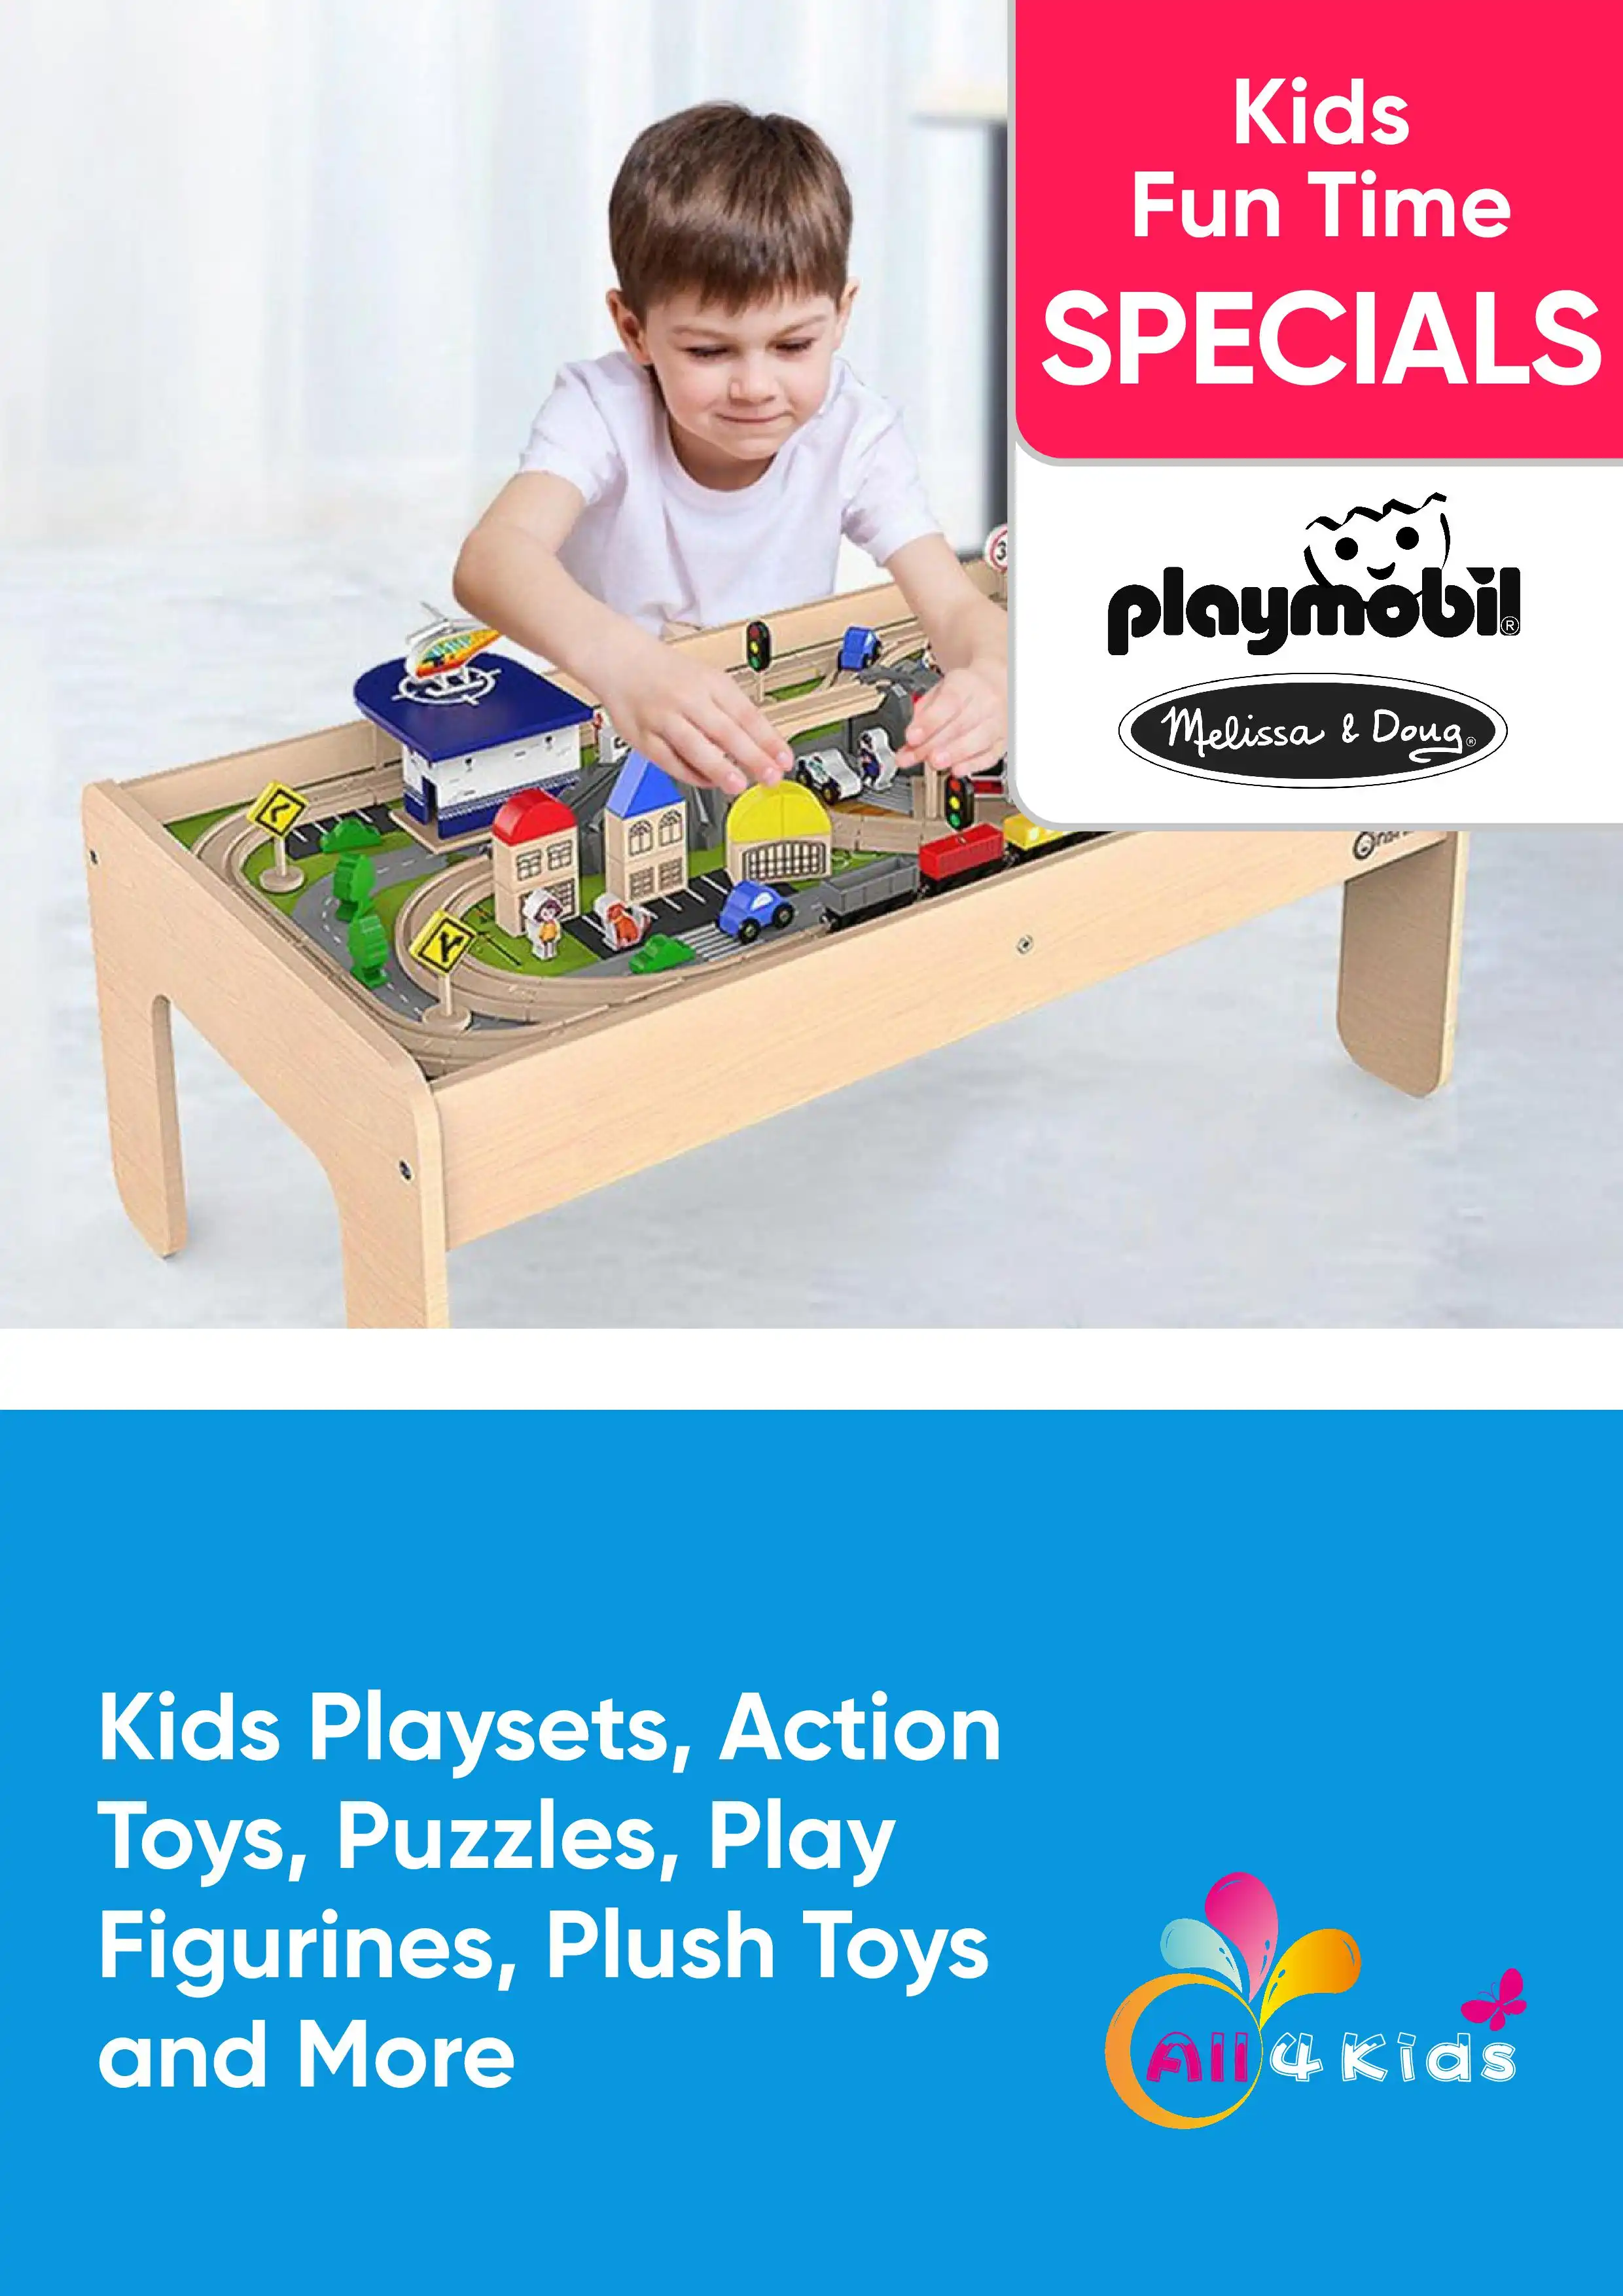 Kids Playsets, Action Toys, Puzzles, Play Figurines, Plush Toys and More